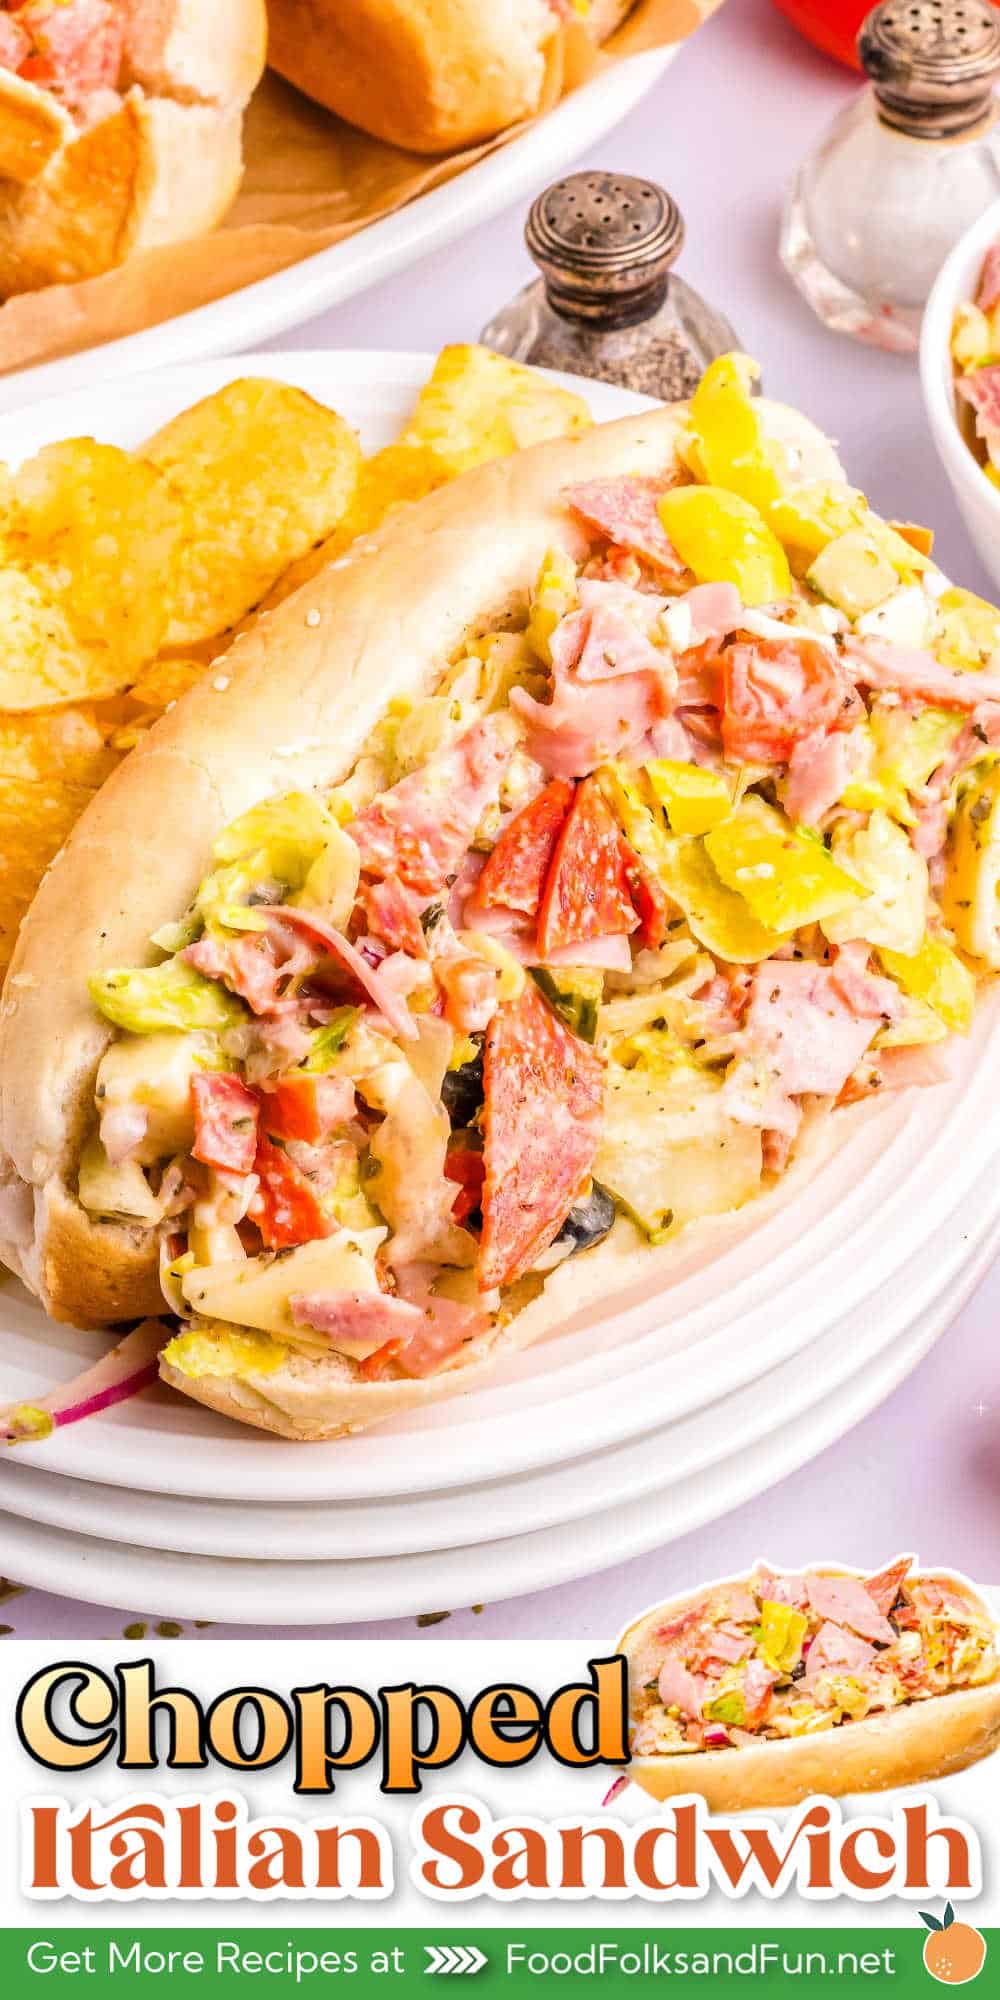 This Chopped Italian Sandwich transforms classic deli favorites into a flavor explosion. Imagine freshly chopped meats, veggies, cheese, and dressing all piled high on a soft sub roll. It's the perfect lunch or dinner that's easy to make and endlessly customizable. via @foodfolksandfun